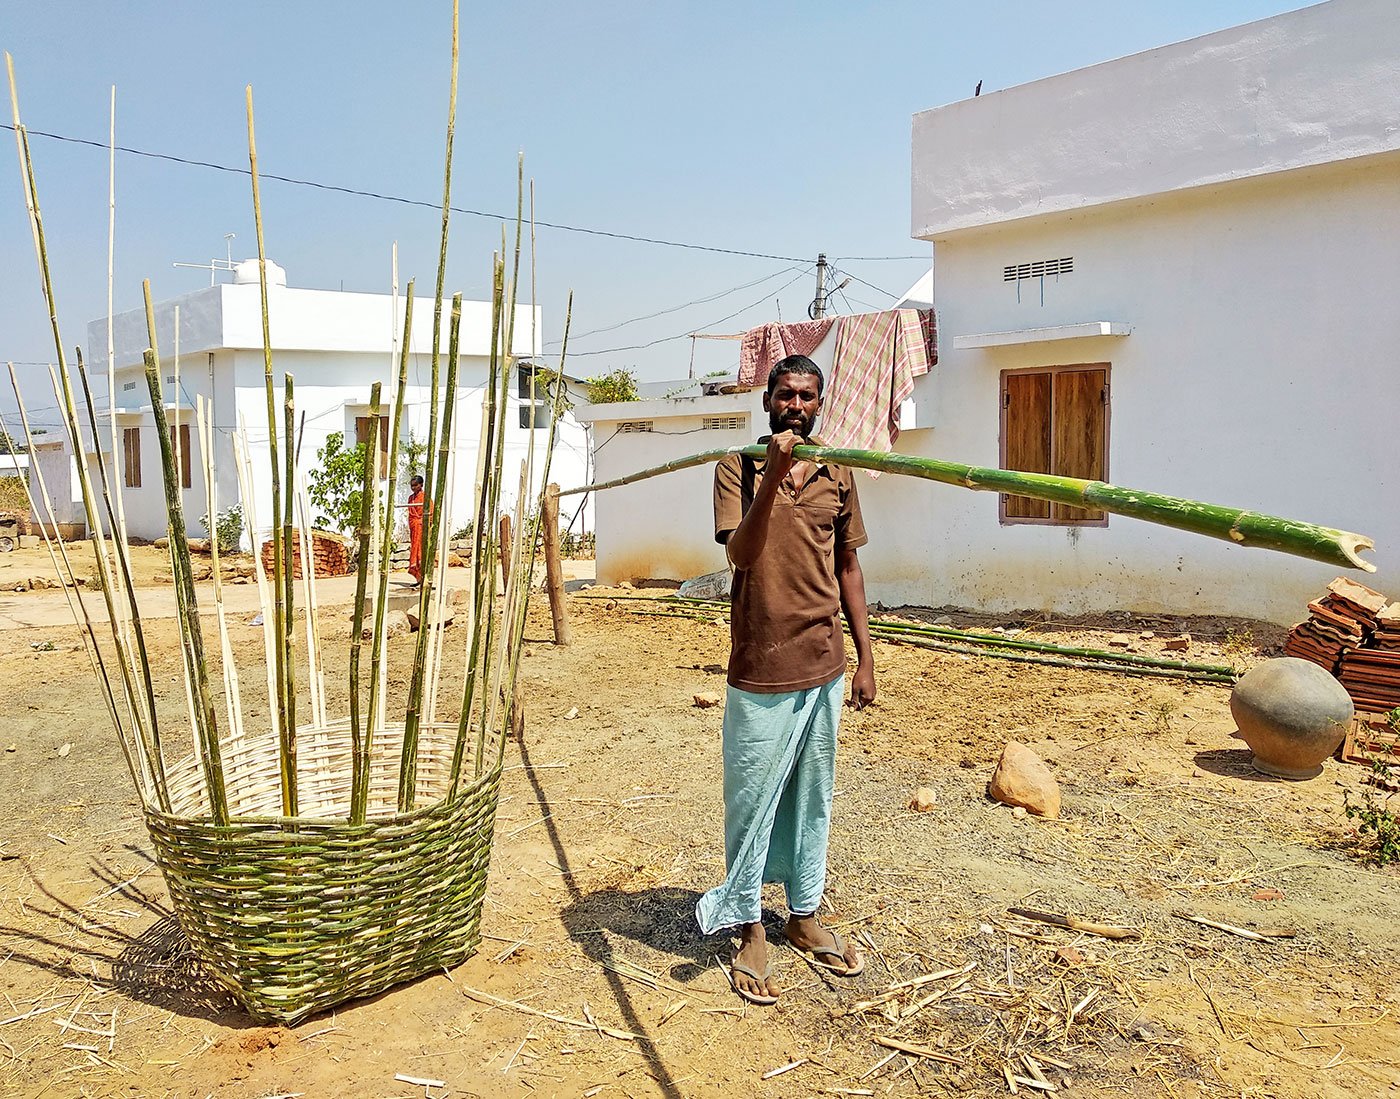 Praveen Kumar works as an agricultural labourer. He goes to the nearby forests and pick up bamboo sticks and make baskets. He takes three days to make one such basket – one day for getting the bamboo from the forests and two for making the basket. He needs three bamboo sticks, of the size he is holding, to make one basket